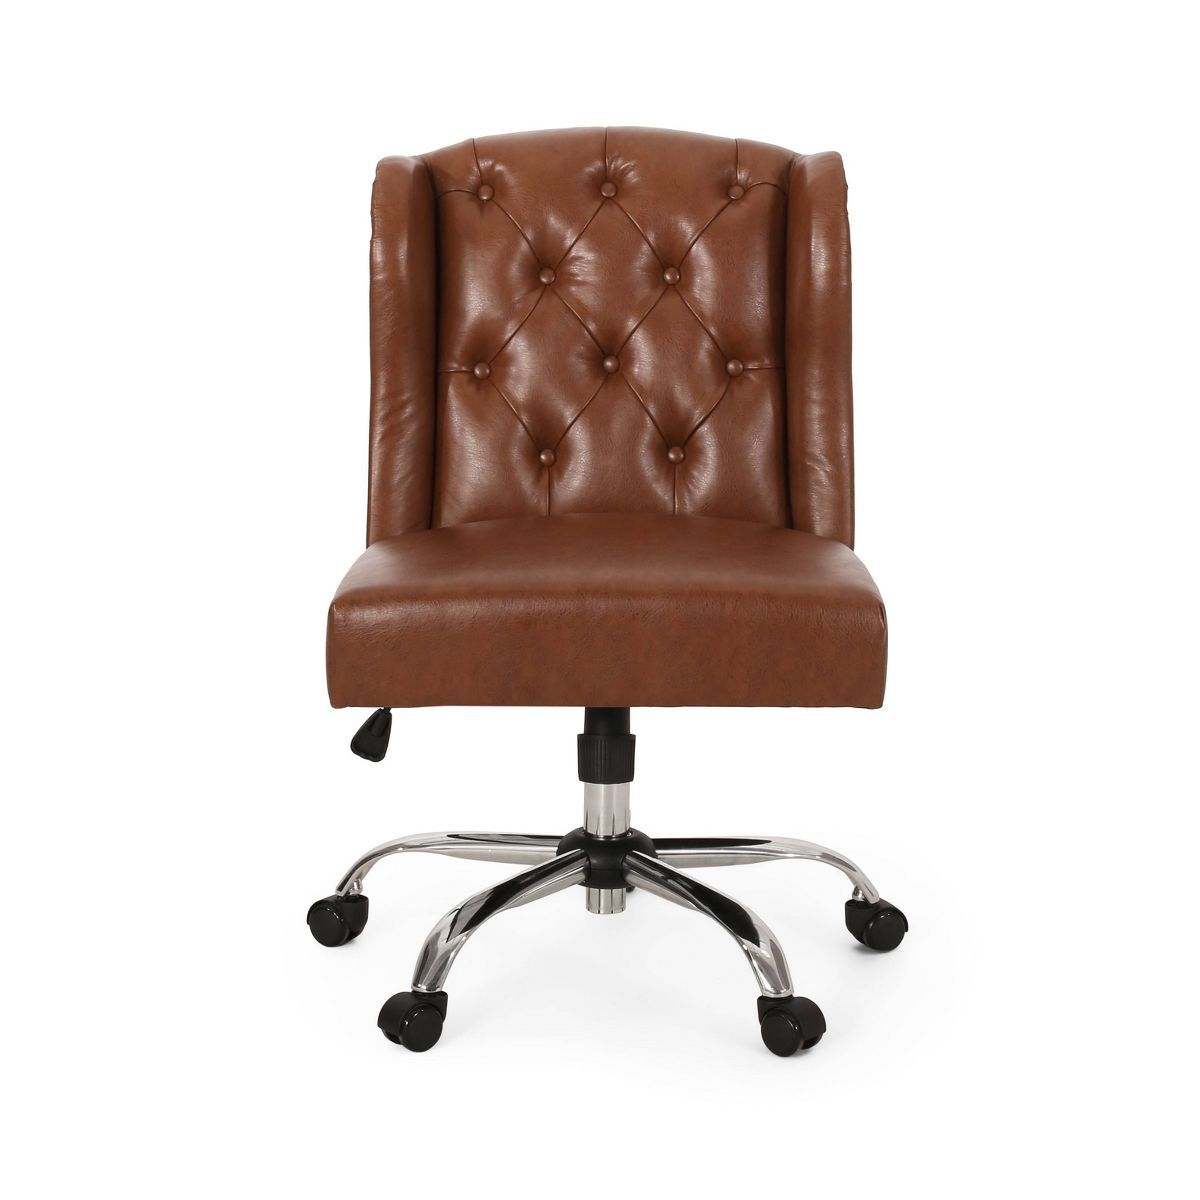 Beltagh Contemporary Wingback Tufted Swivel Office Chair - Christopher Knight Home | Target